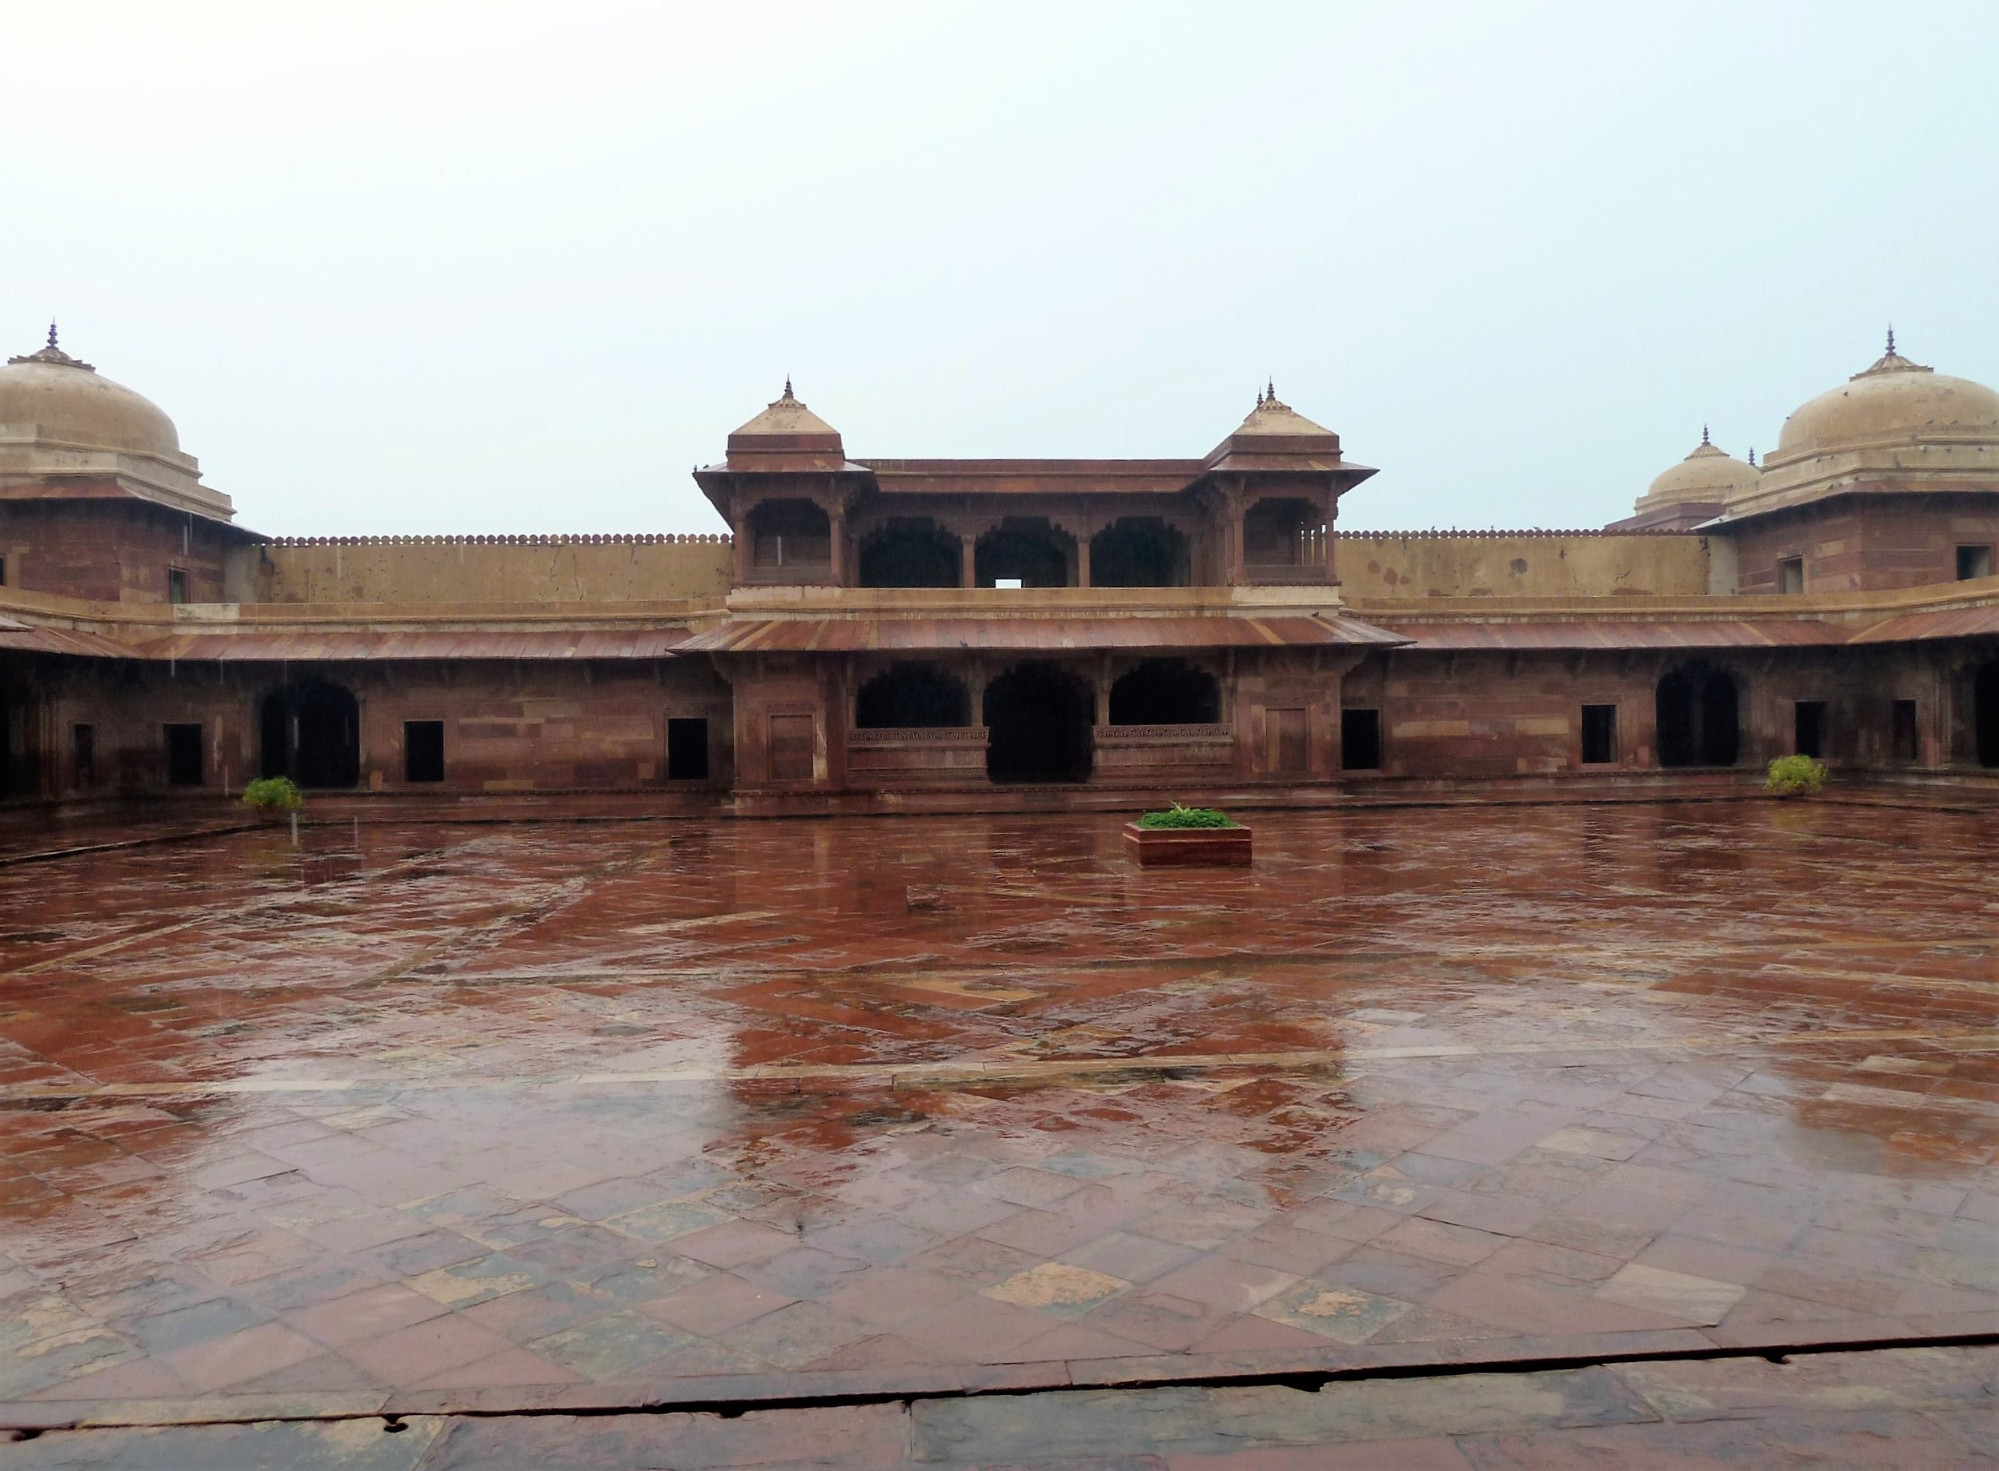 Landmark fortress & former capital of the Mughal Empire, <br/>
Palace of Akbar's favorite consort, Queen Mariam-uz-Zamani<br/>
